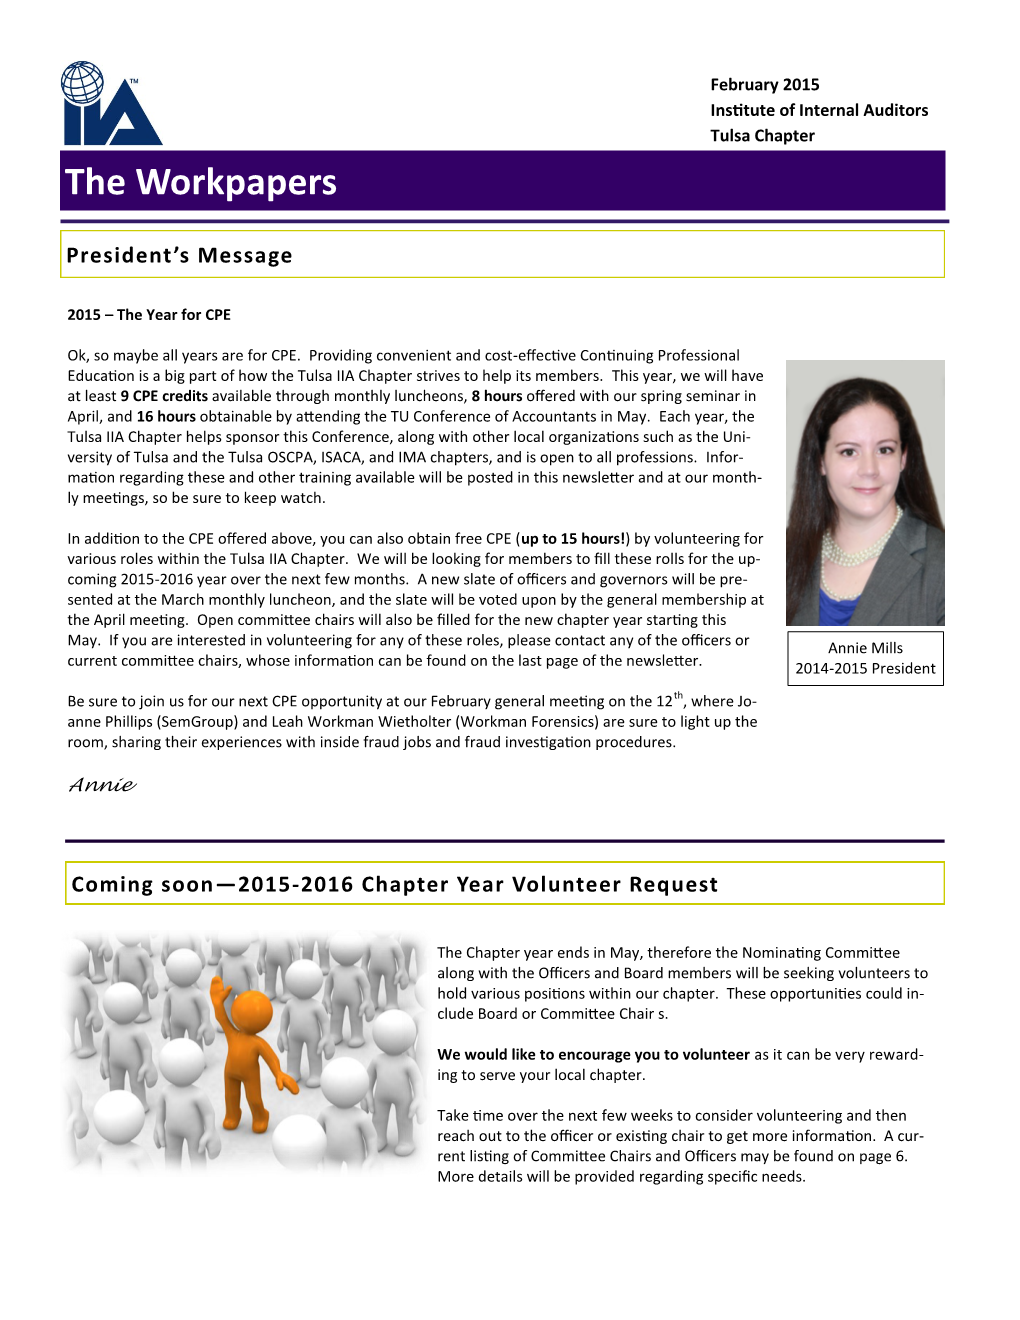 The Workpapers